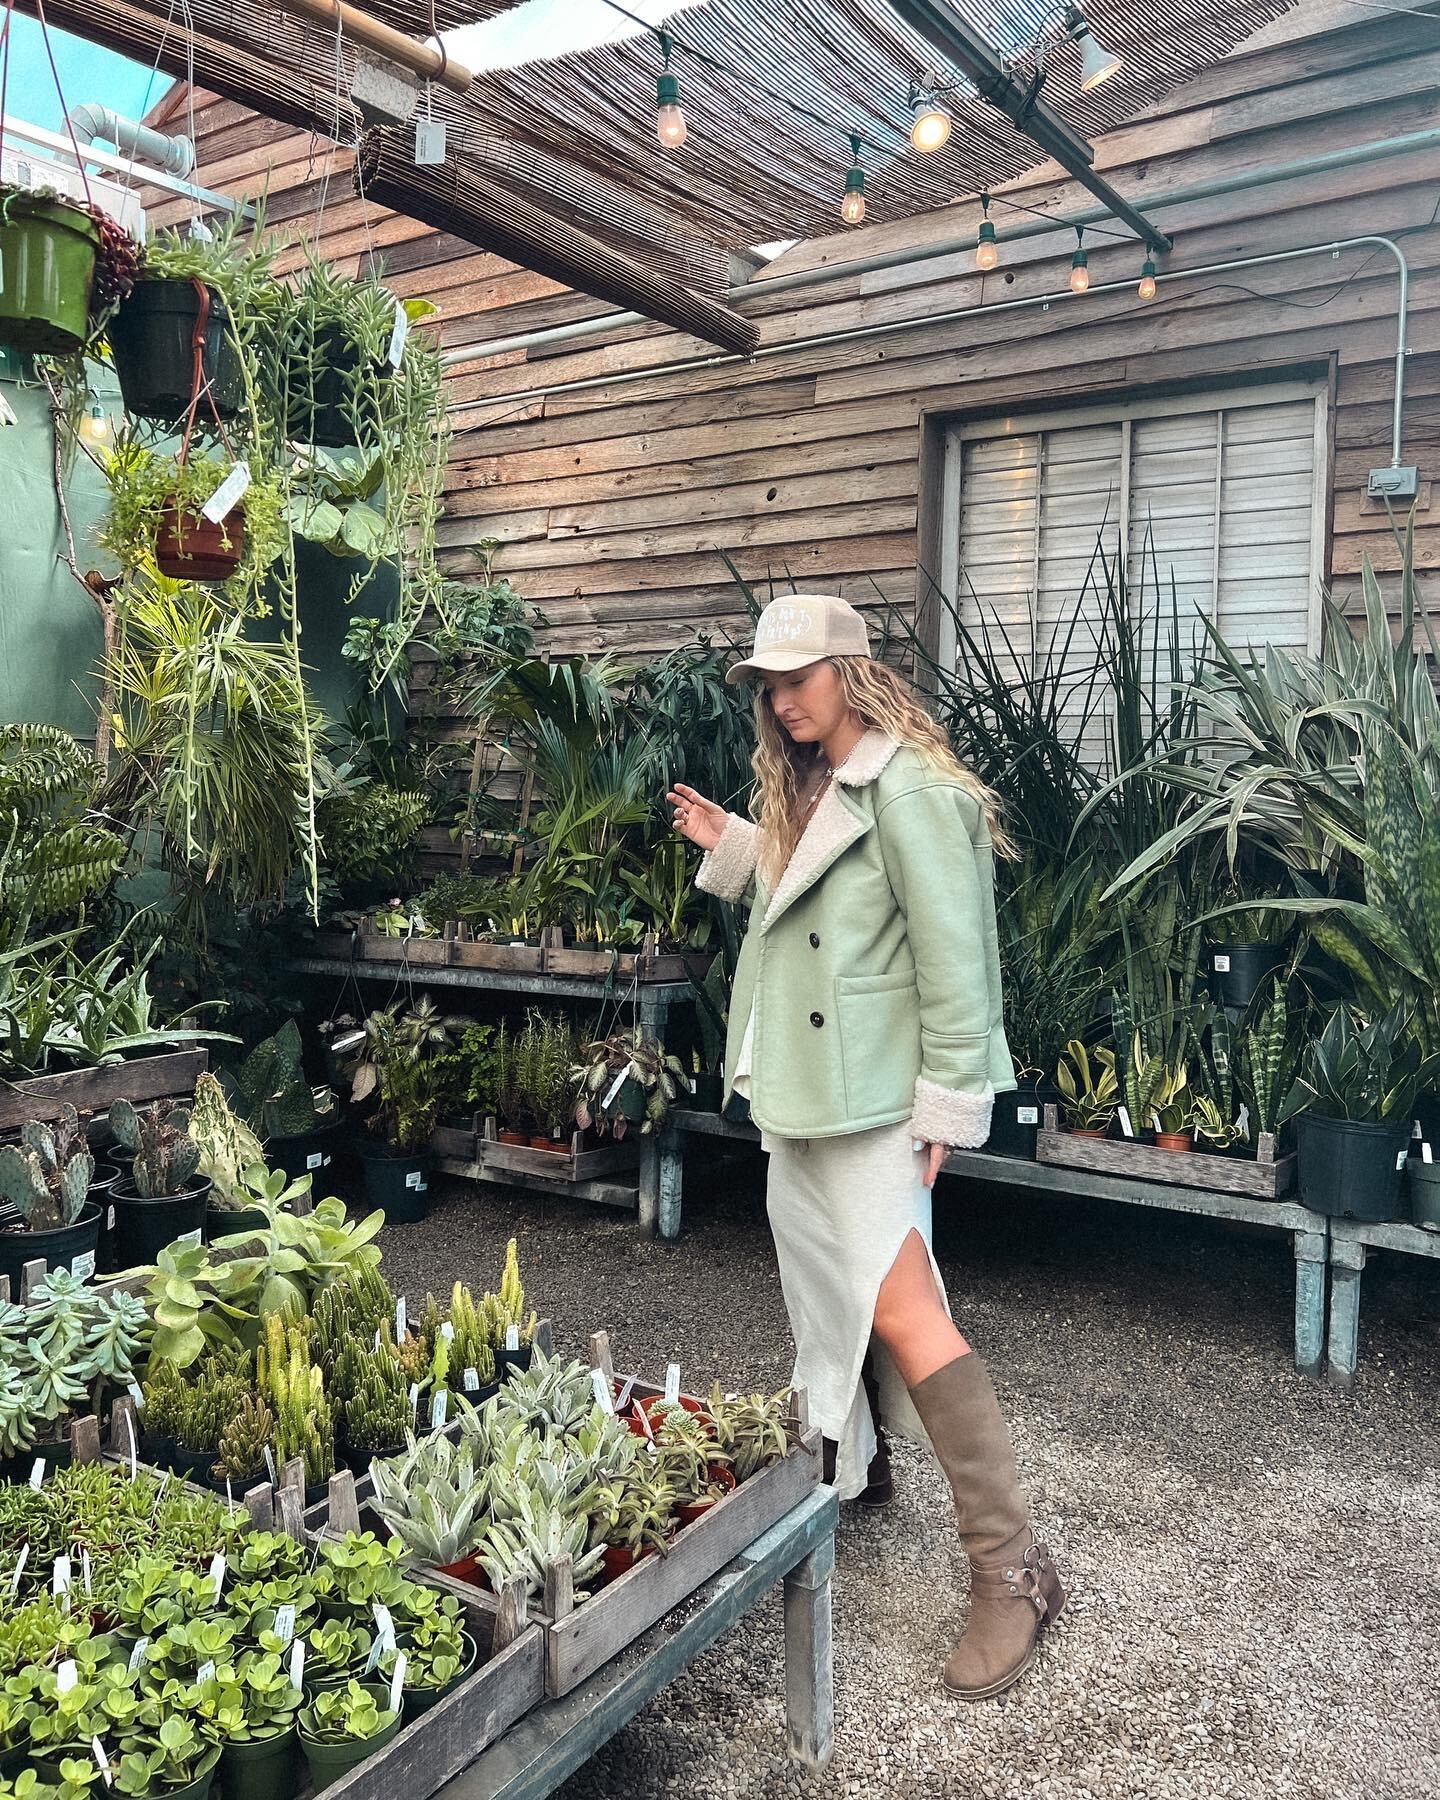 It&rsquo;s 85&deg; in this greenhouse with 100% chance of sweating right through this cutie jacket 🪴 @freepeople #whenyouwearfp #ad